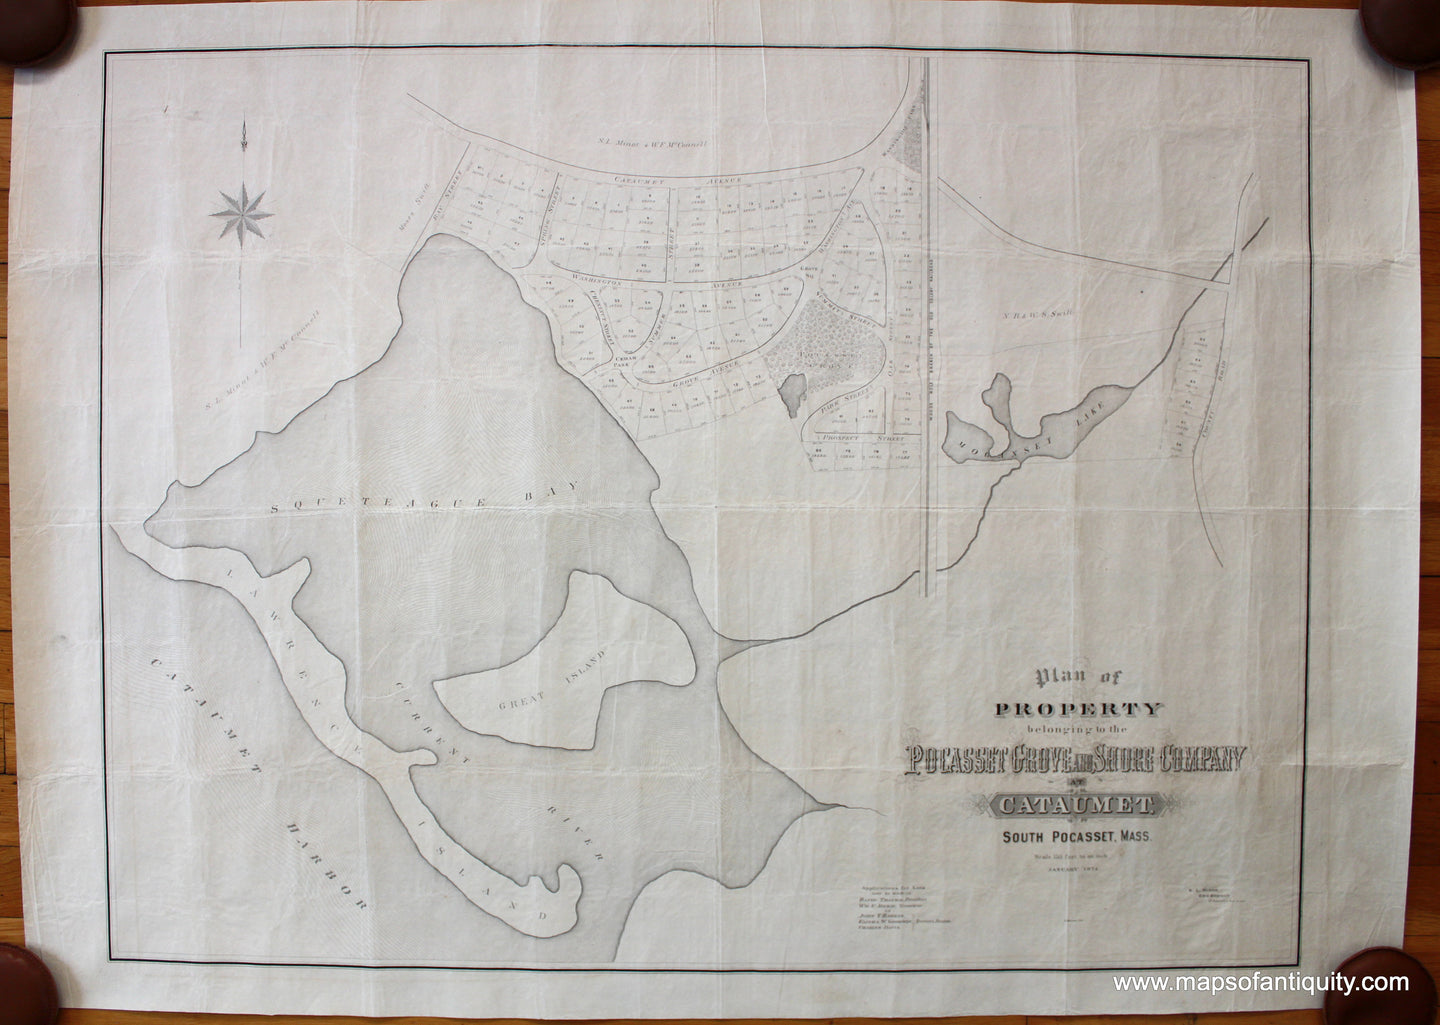 Antique-Black-and-White-Map-Cataumet-Mass.---Plan-of-Property-belonging-to-the-Pocasset-Grove-and-Shore-Company-at-Cataumet-South-Pocasset-Mass.-United-States-Massachusetts-1874-Meisel-Maps-Of-Antiquity